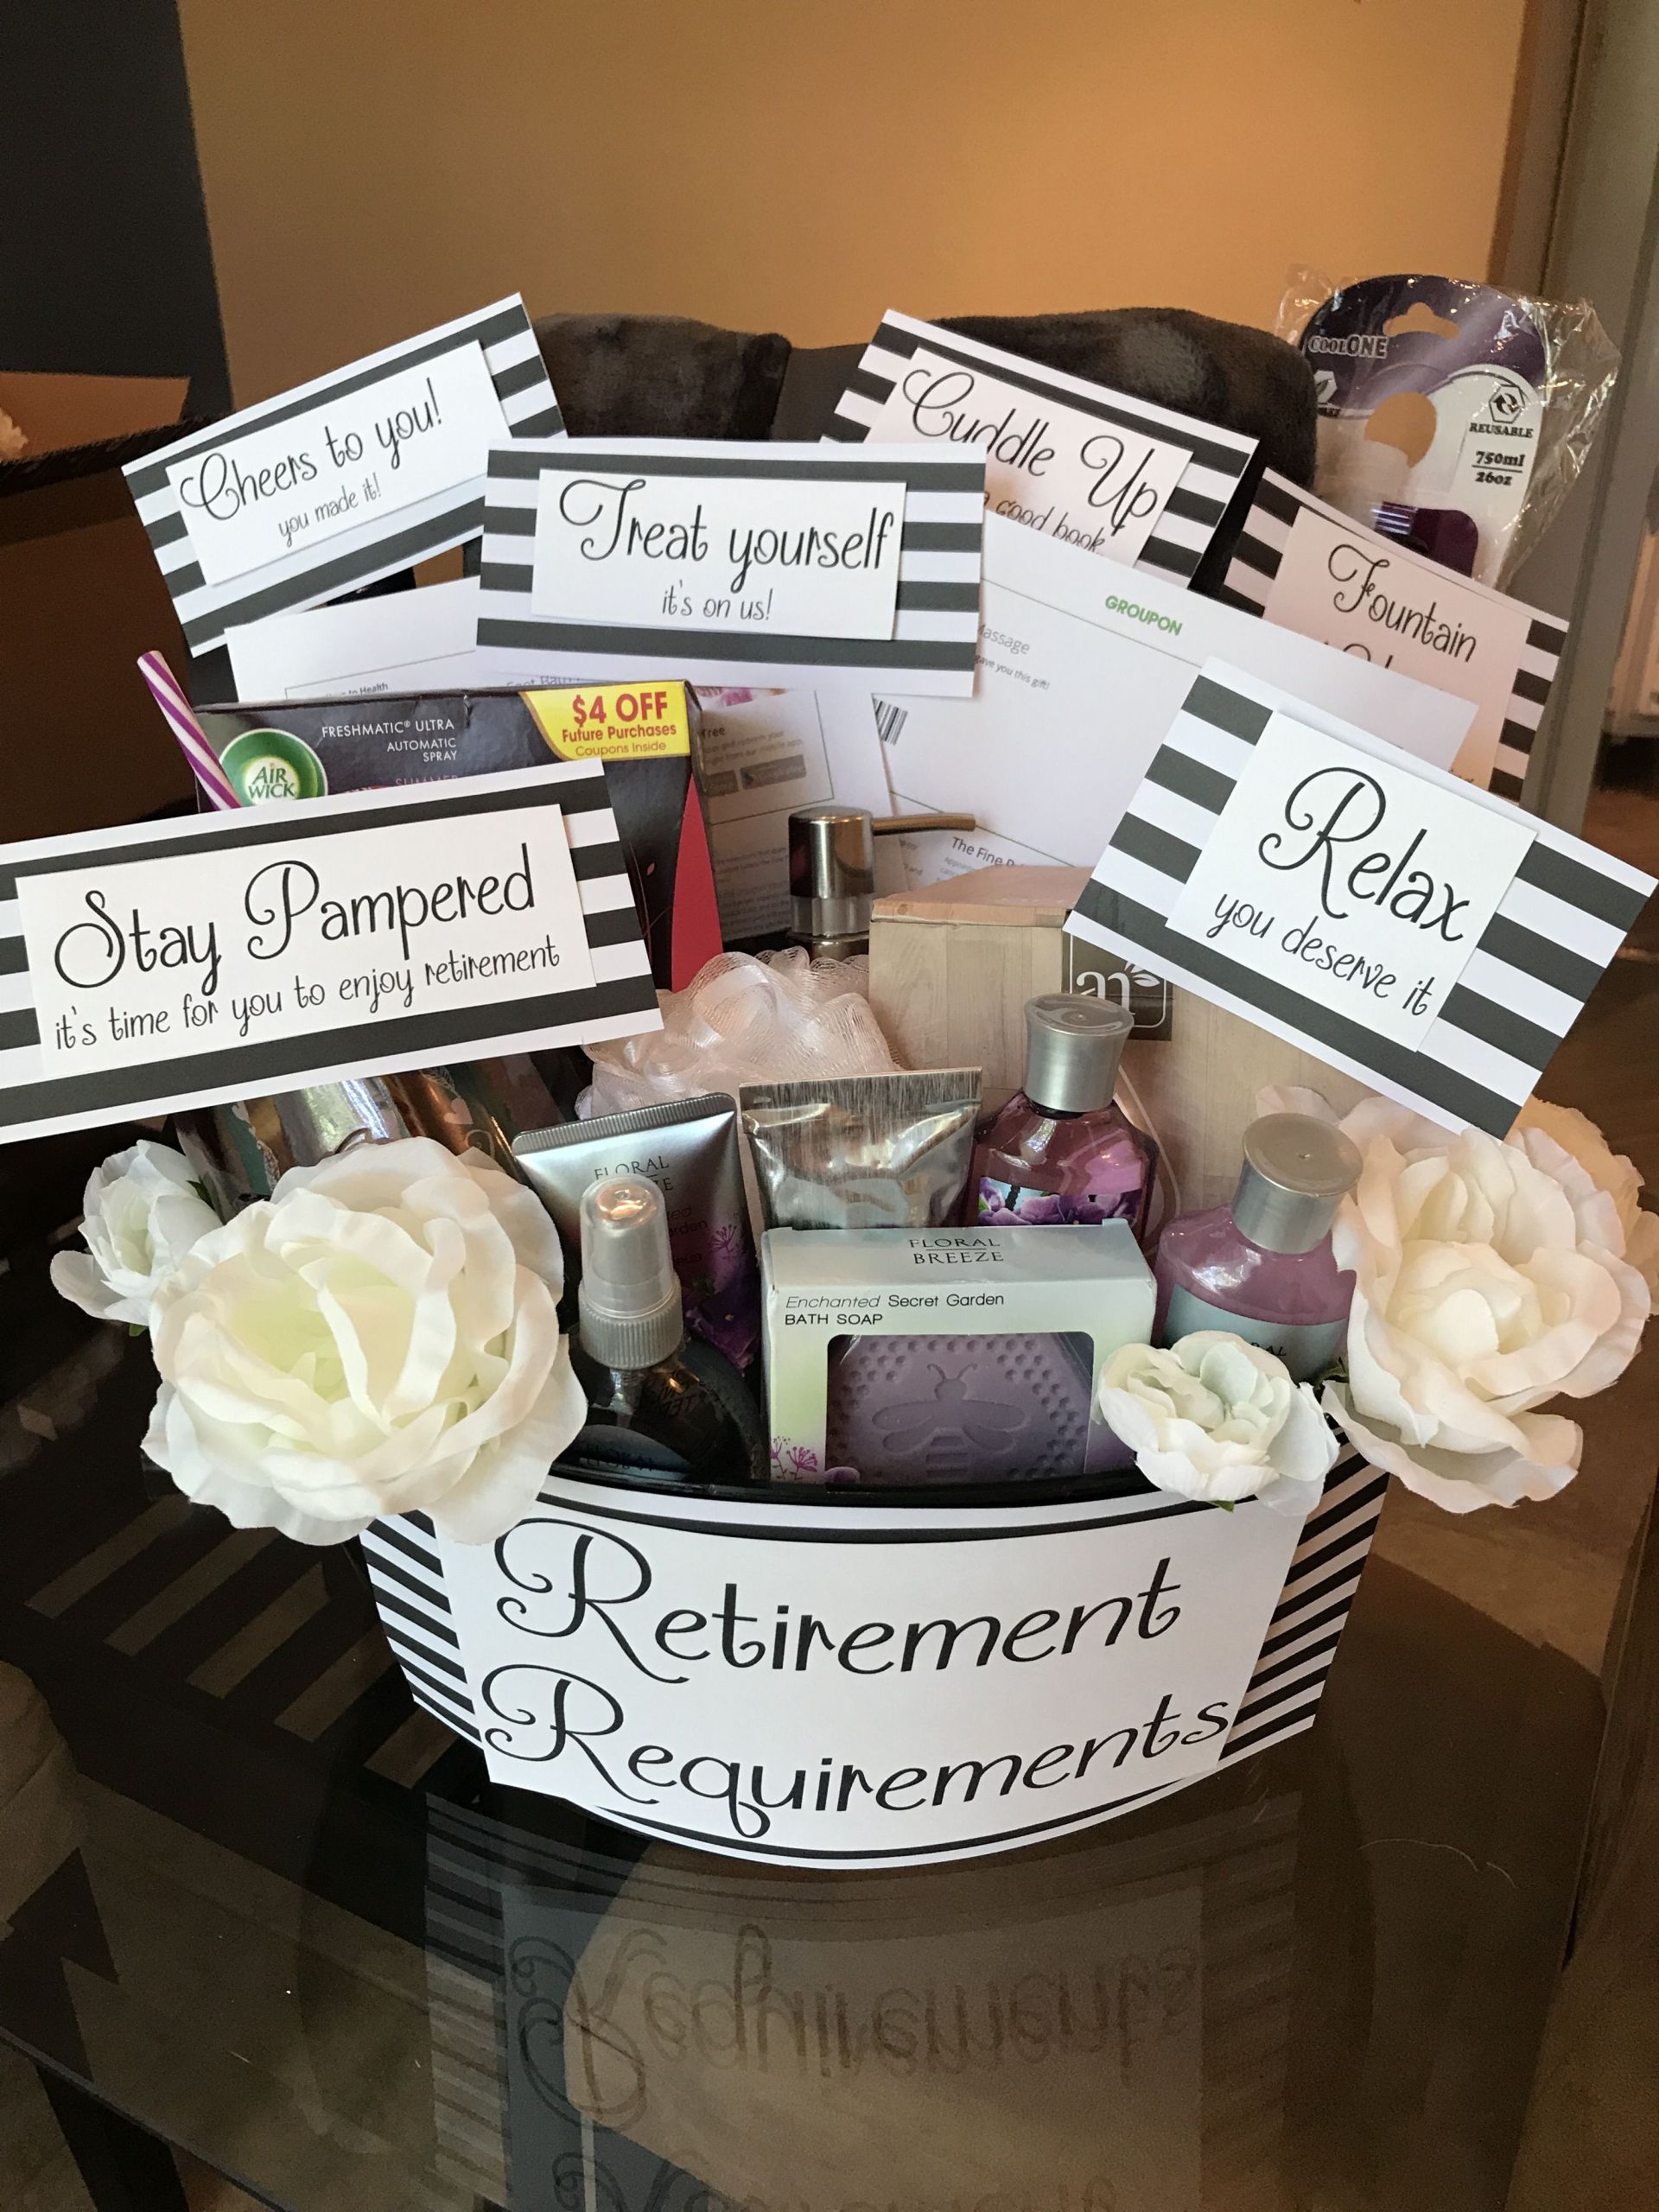 Retirement Gift Ideas For Couples
 Retirement Requirements Basket